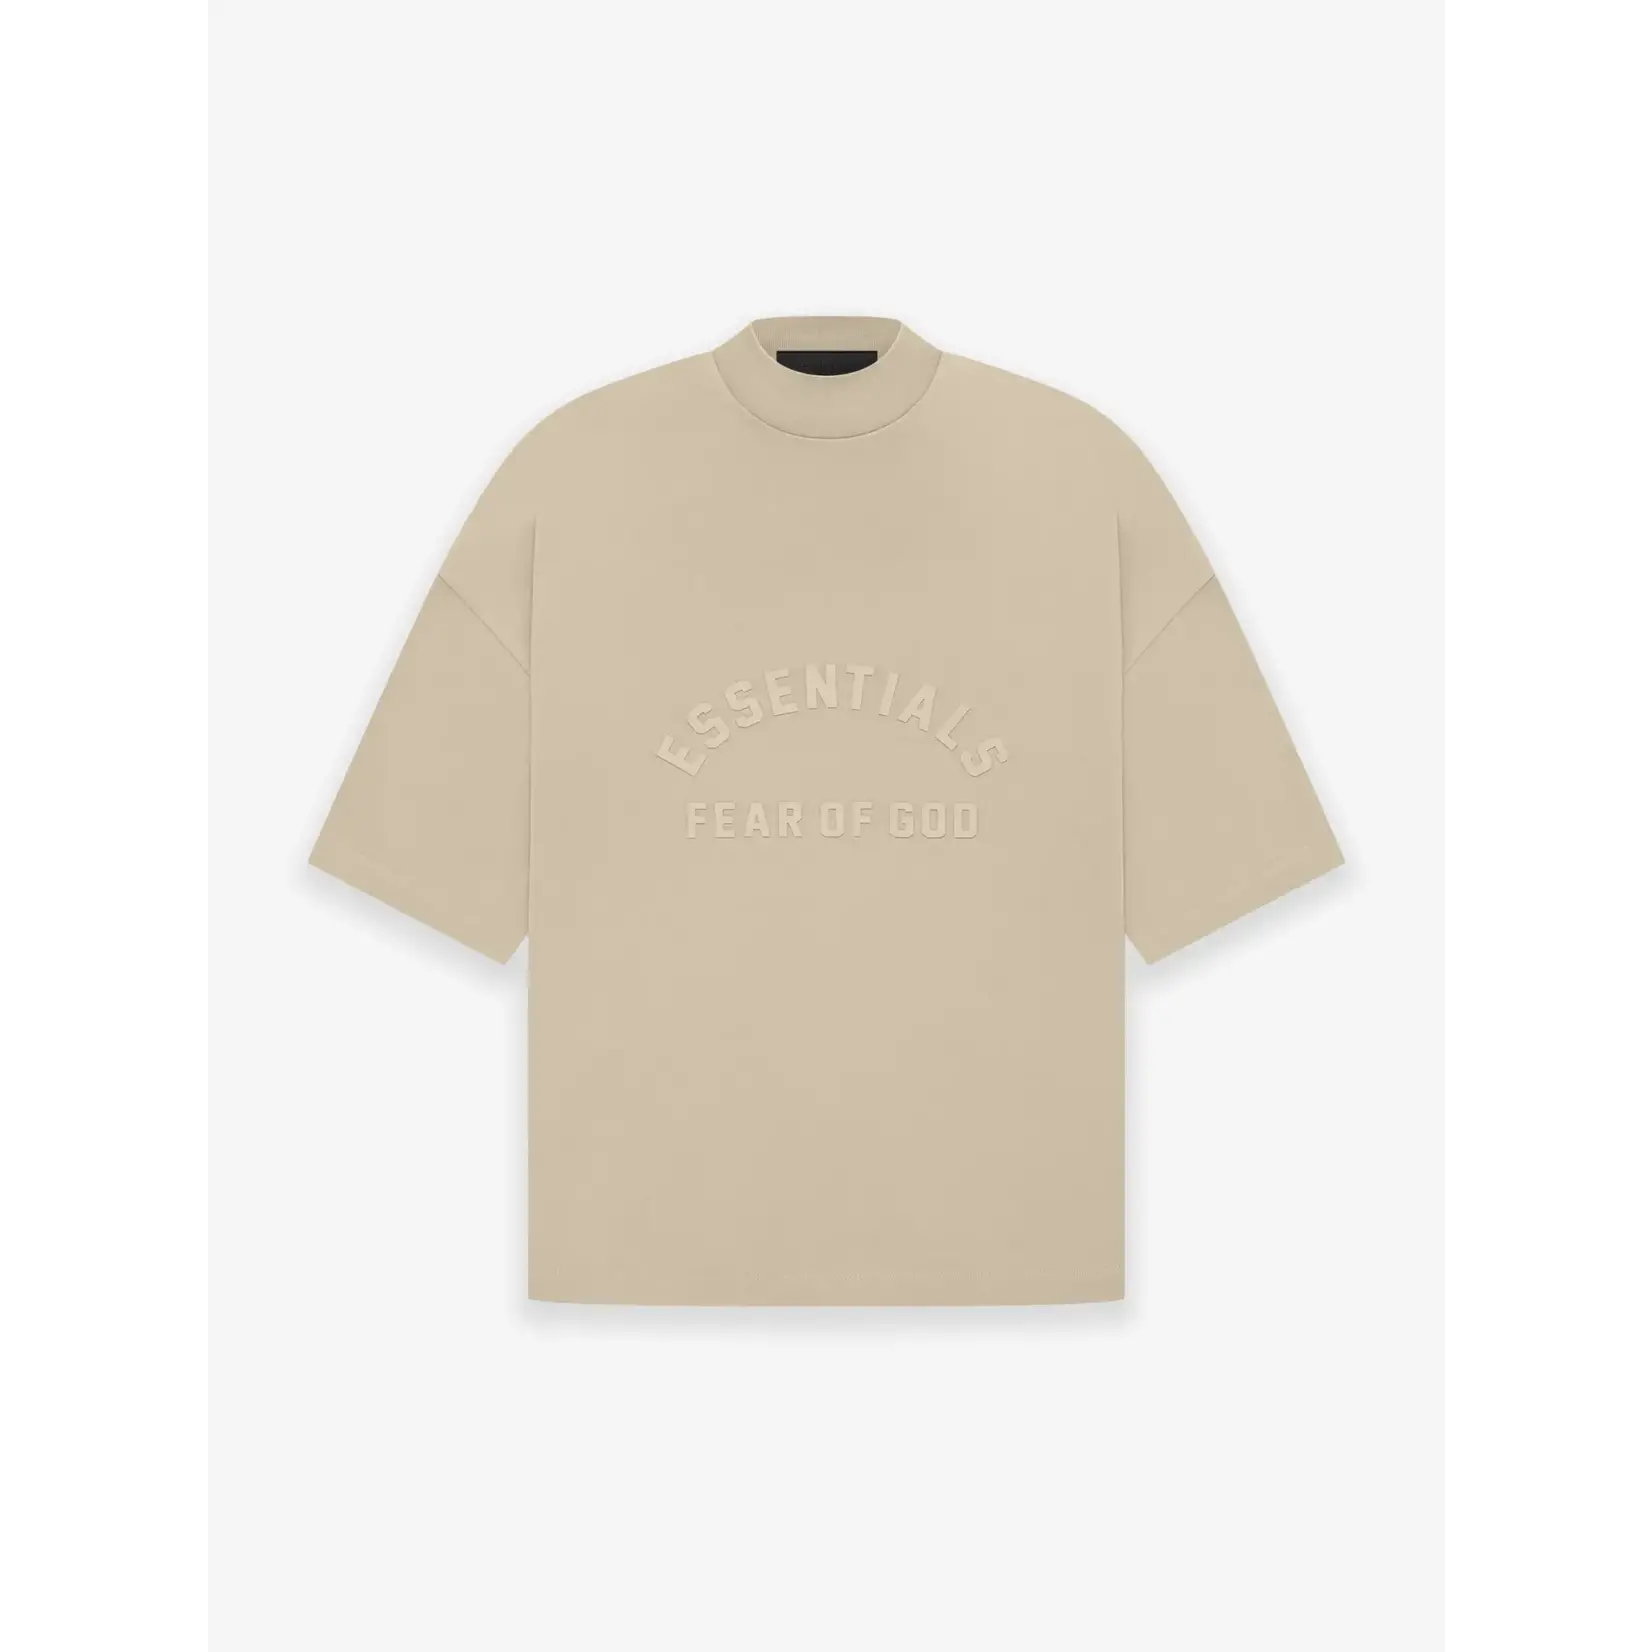 Fear Fear of God Essentials T Shirt Dusty Beige Size Small, DS BRAND NEW